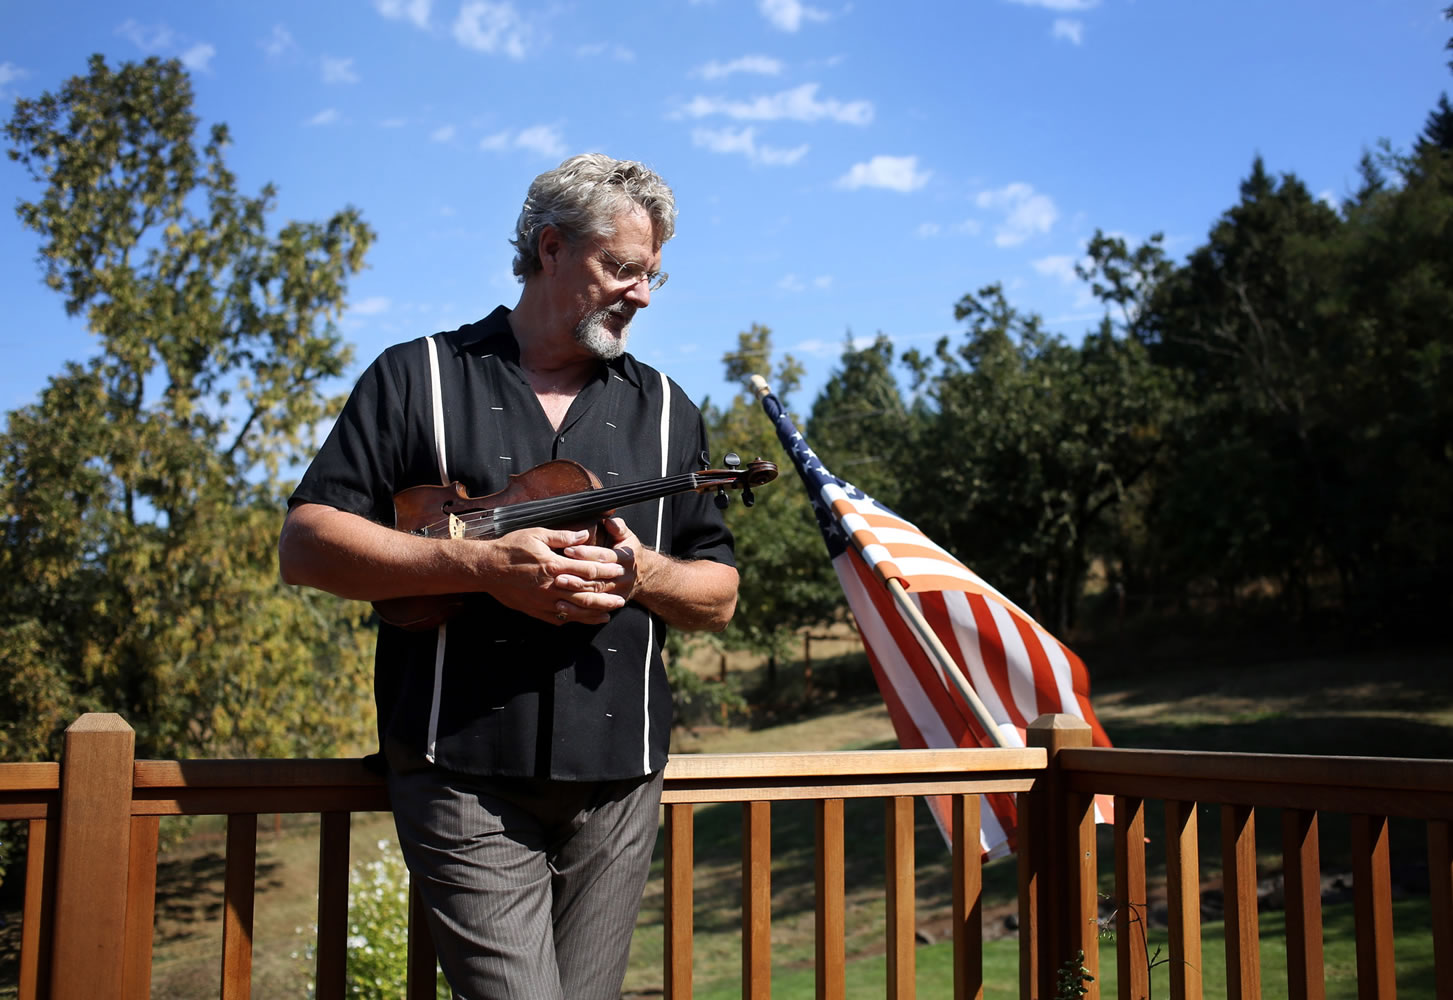 Eugene musician Brian Price, 63, has played everything from jazz piano to the violin.